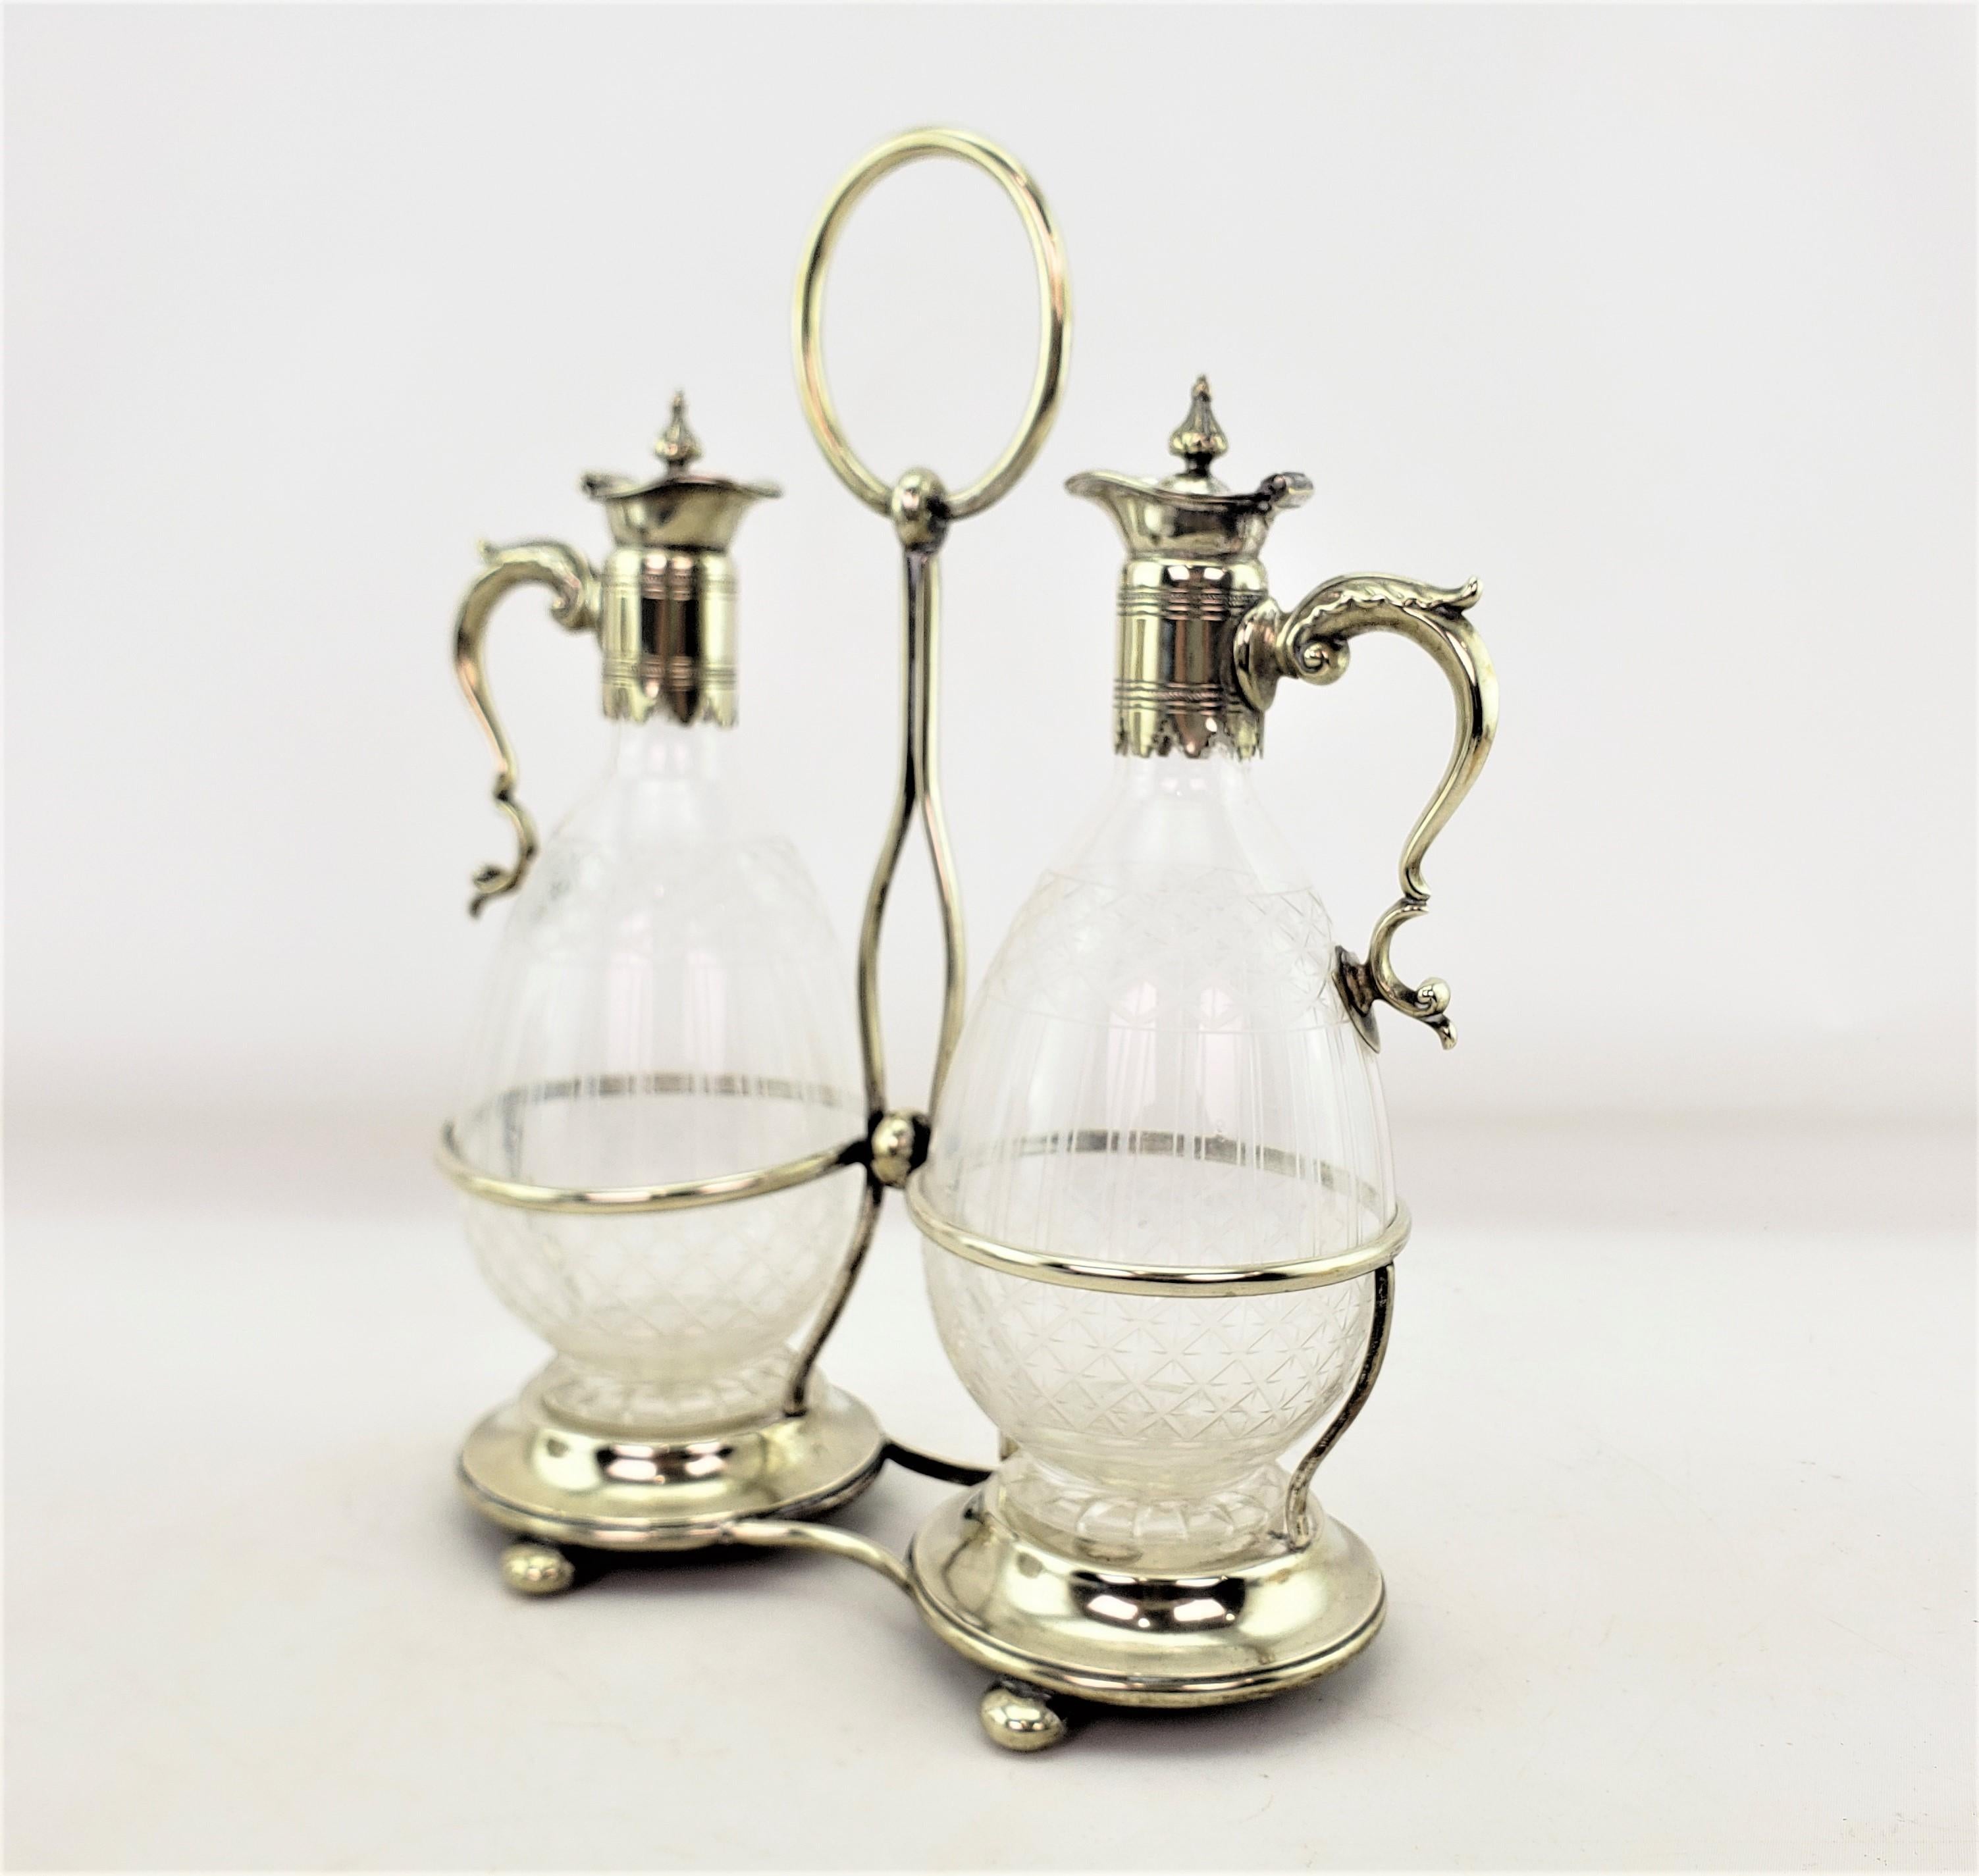 20th Century Antique Pair of Silver Plated & Etched Glass Claret Jugs, or Sherry Decanters For Sale